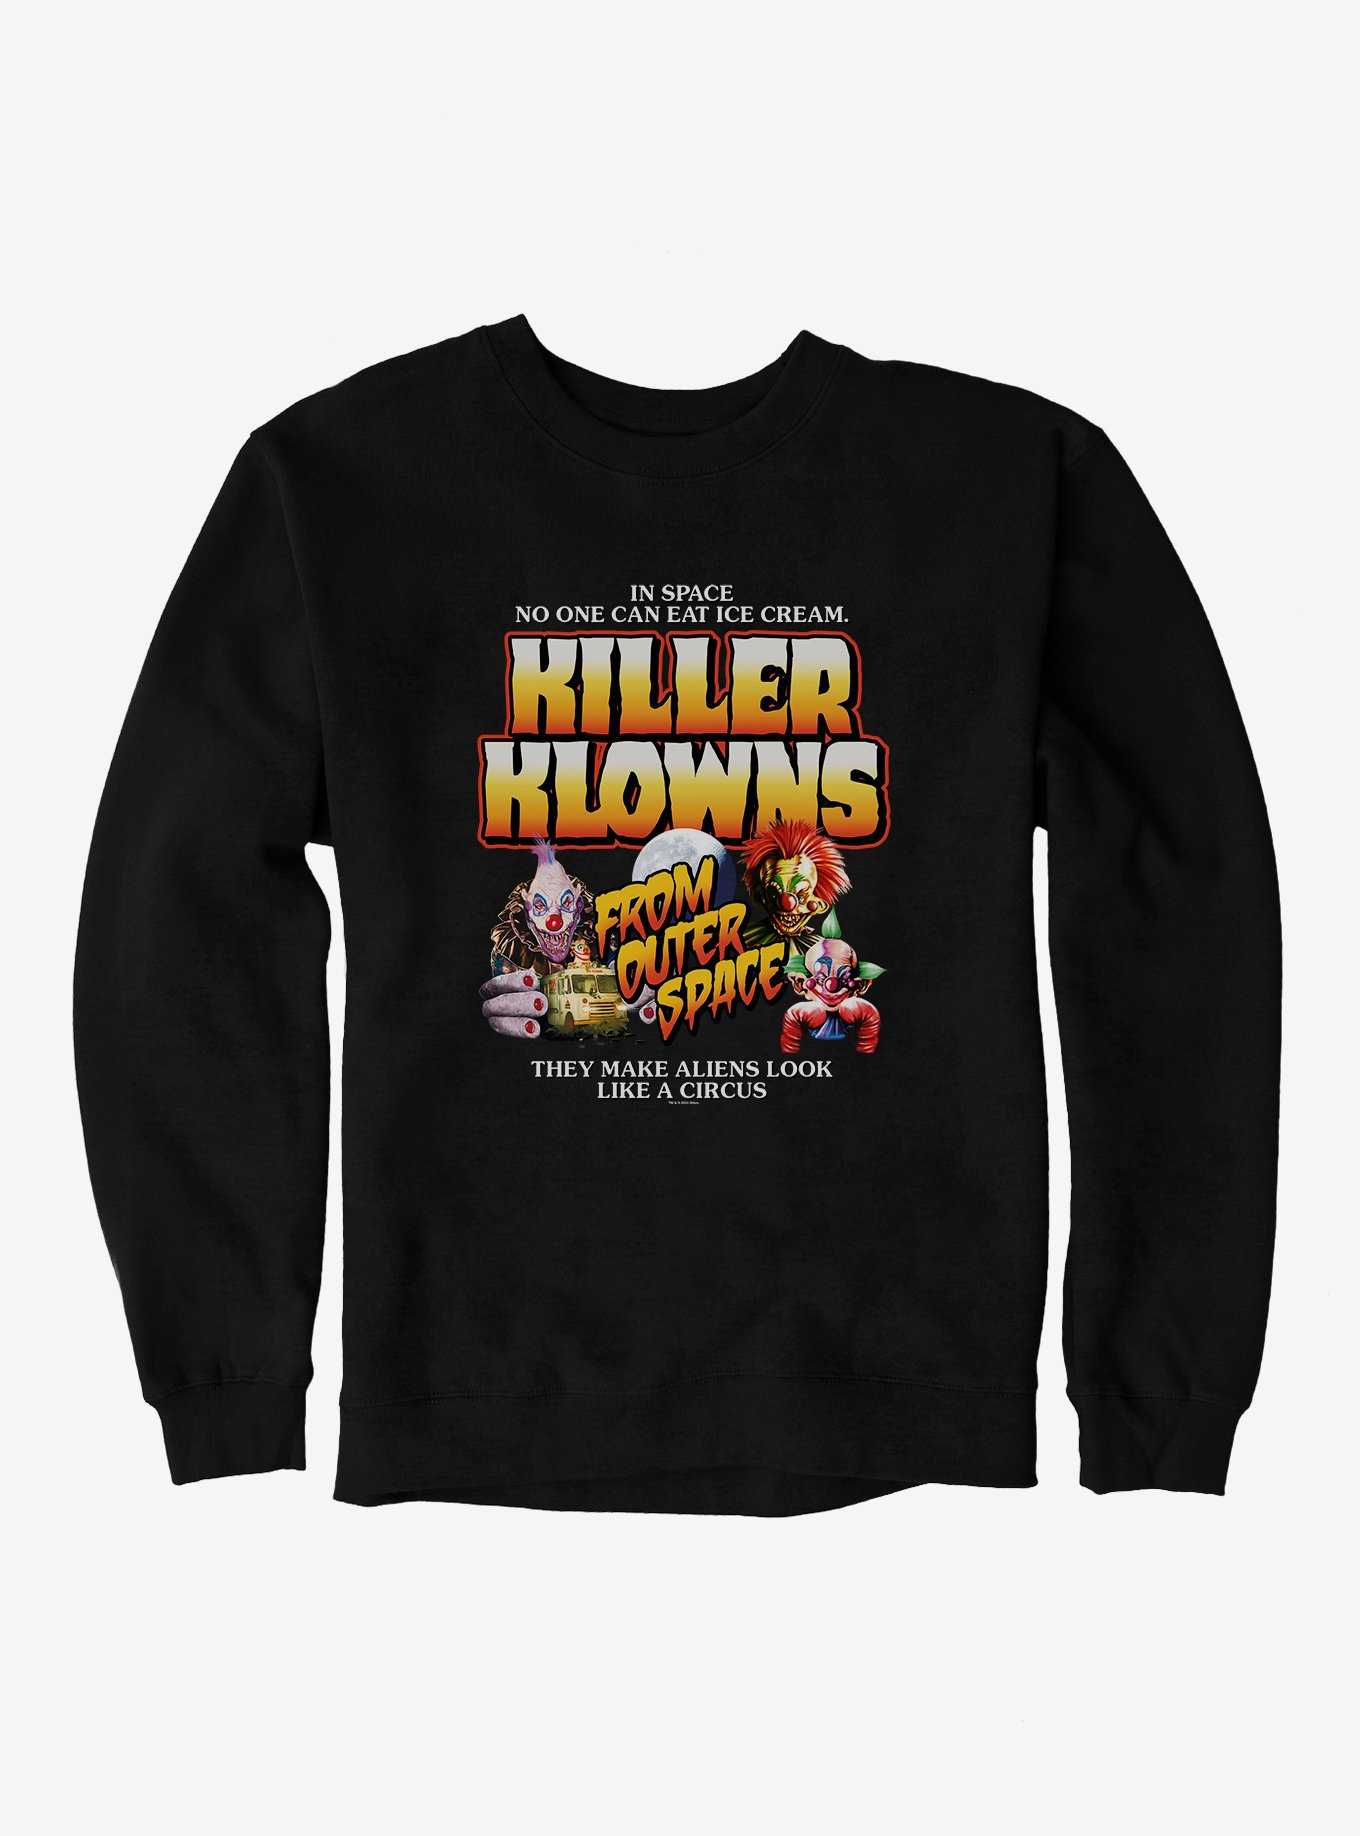 Killer Klowns From Outer Space In Space No One Can Eat Ice Cream Sweatshirt, , hi-res